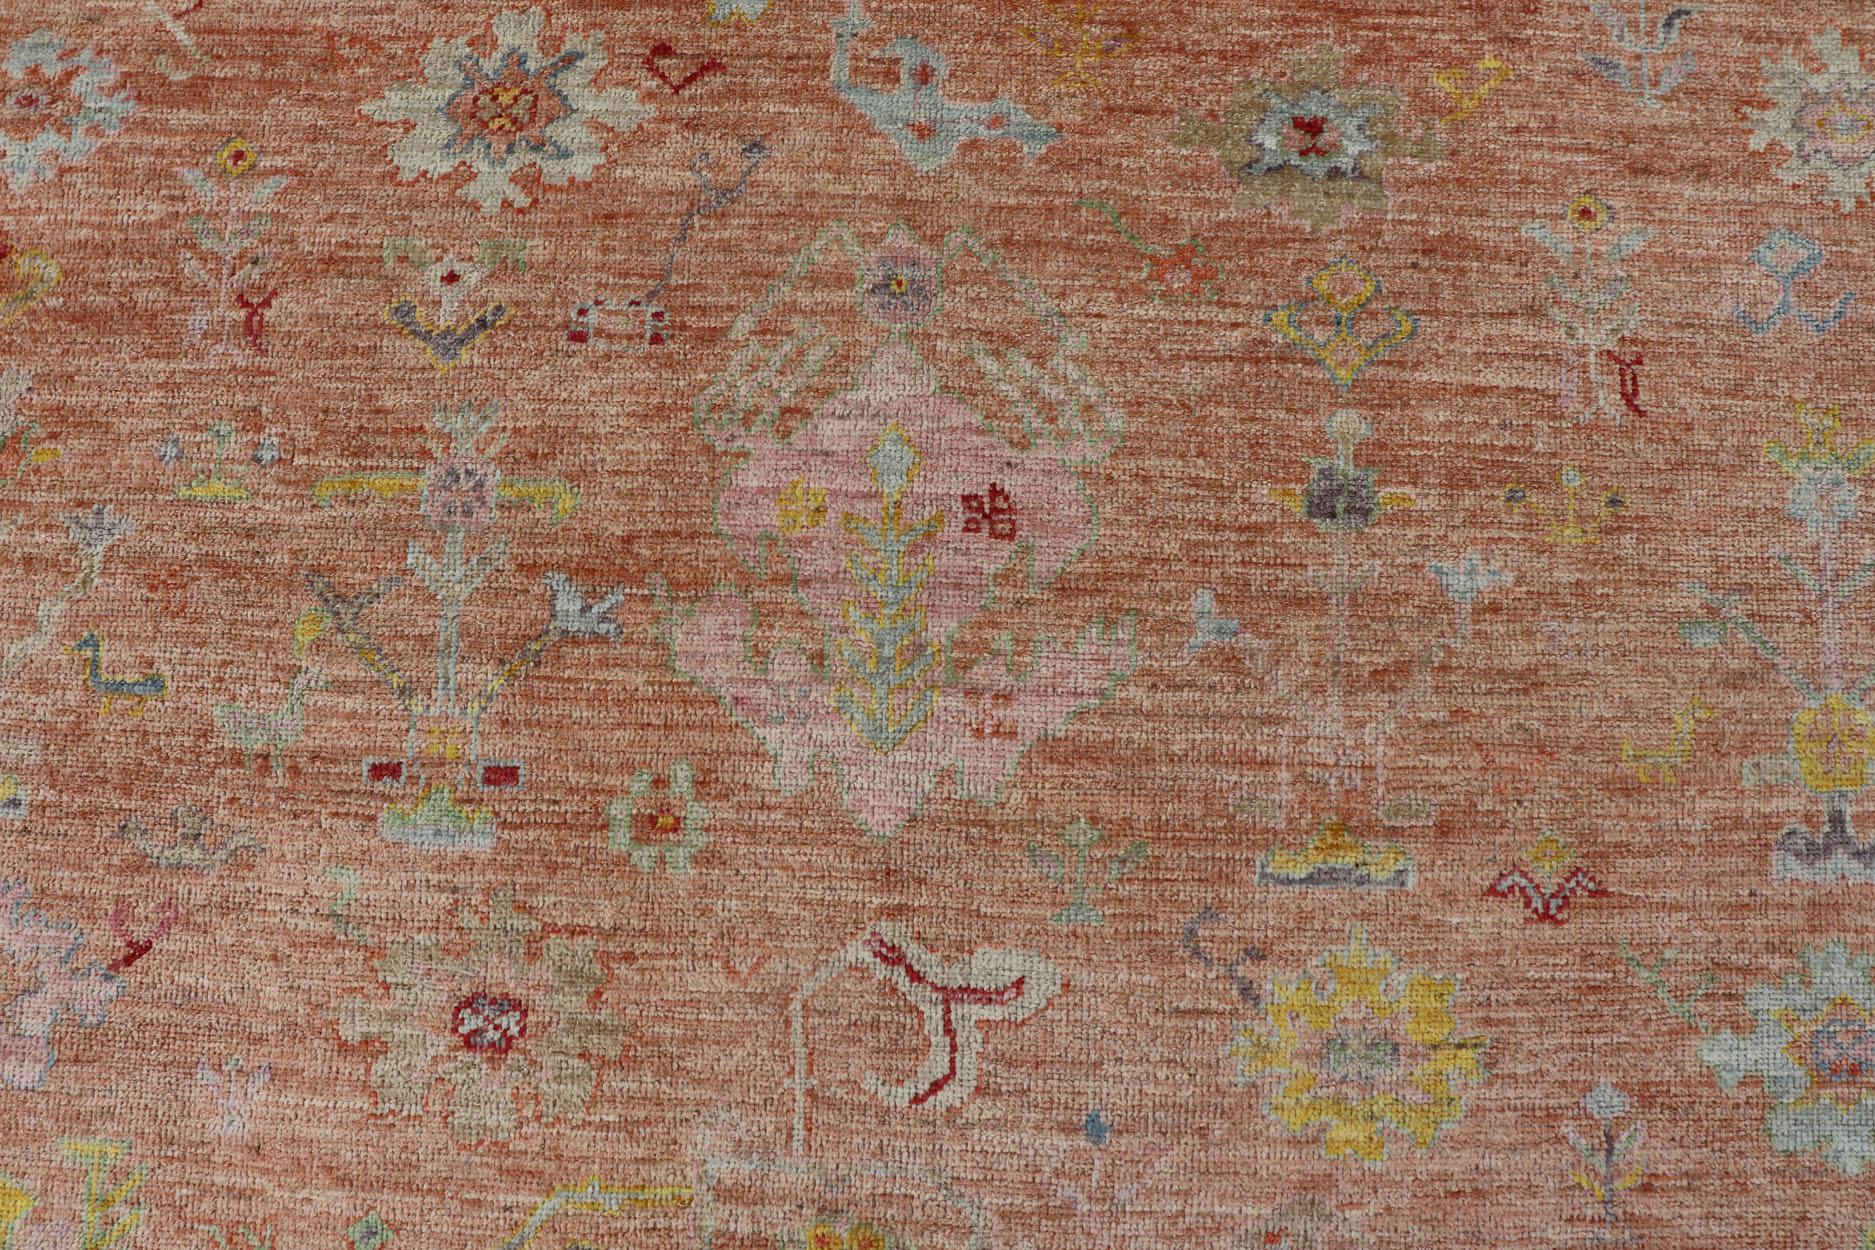 Vibrant Floral Medley on Salmon Pink Hand-Knotted Rug by Keivan Woven Arts. rug / AN-149682, Turkish 21st Century.
Measures: 10'0 x 12'11 
The rug showcase's a beautifully woven rug with a vibrant and colorful design on a warm salmon pink